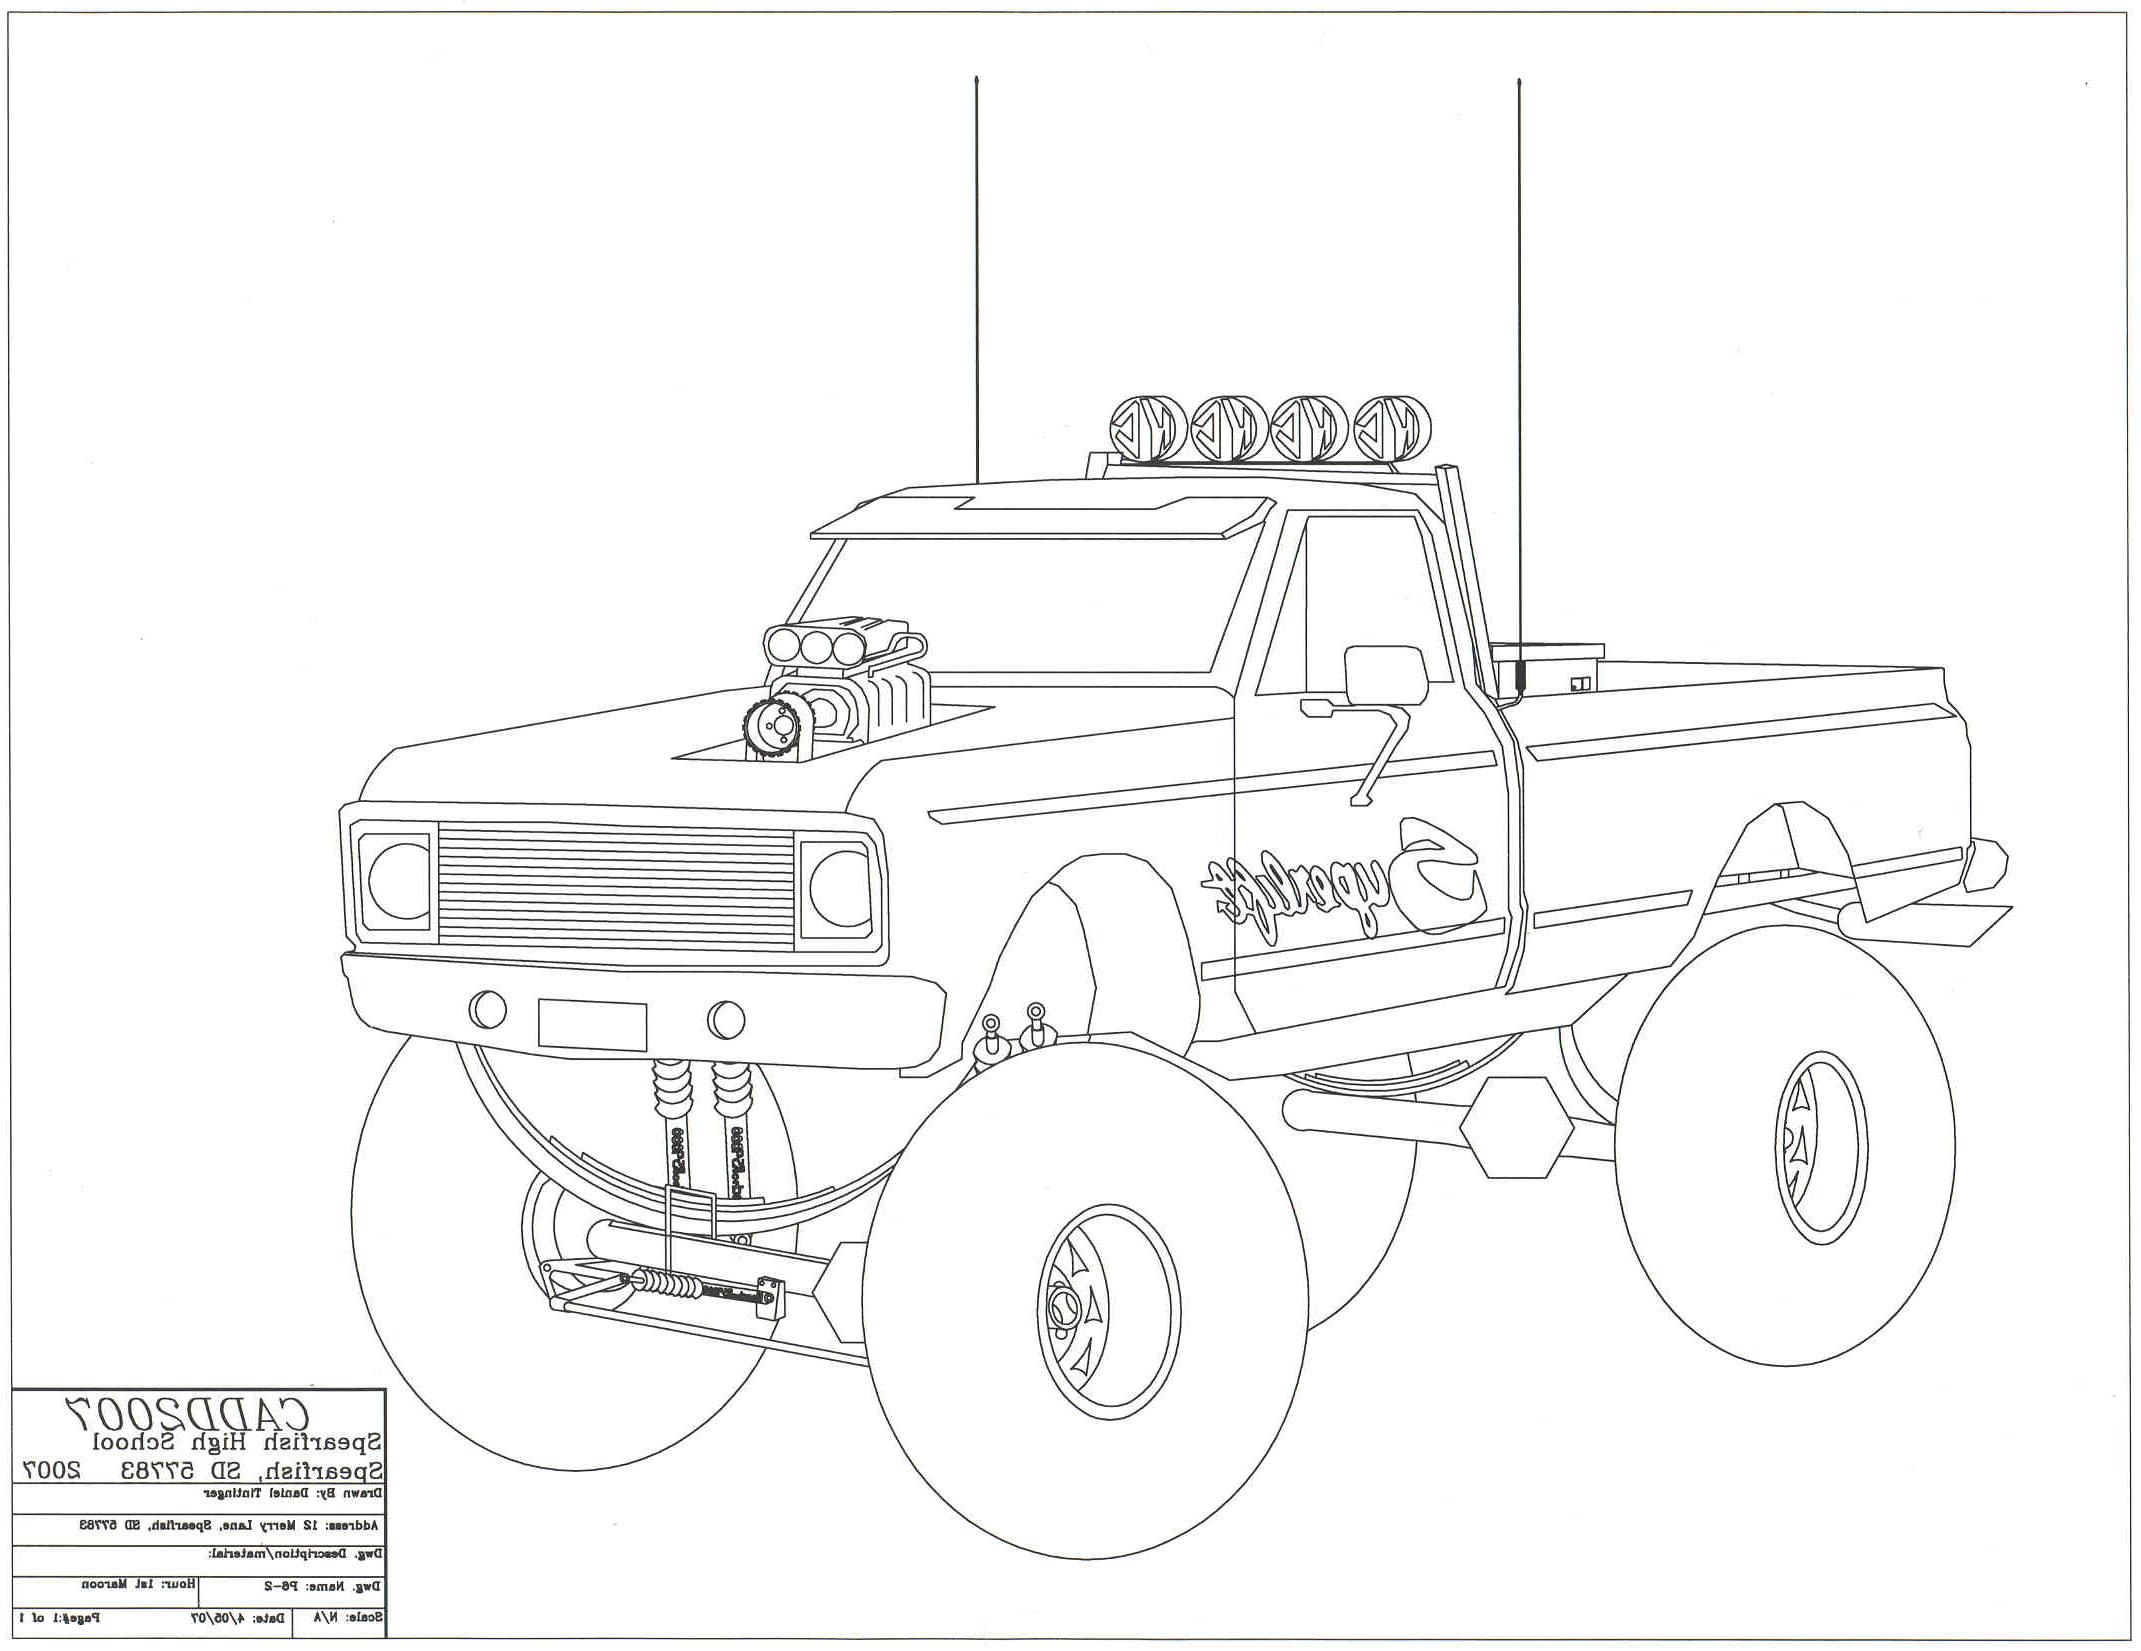 Best Lifted Truck Drawing Image - Lifted Truck Drawings. 